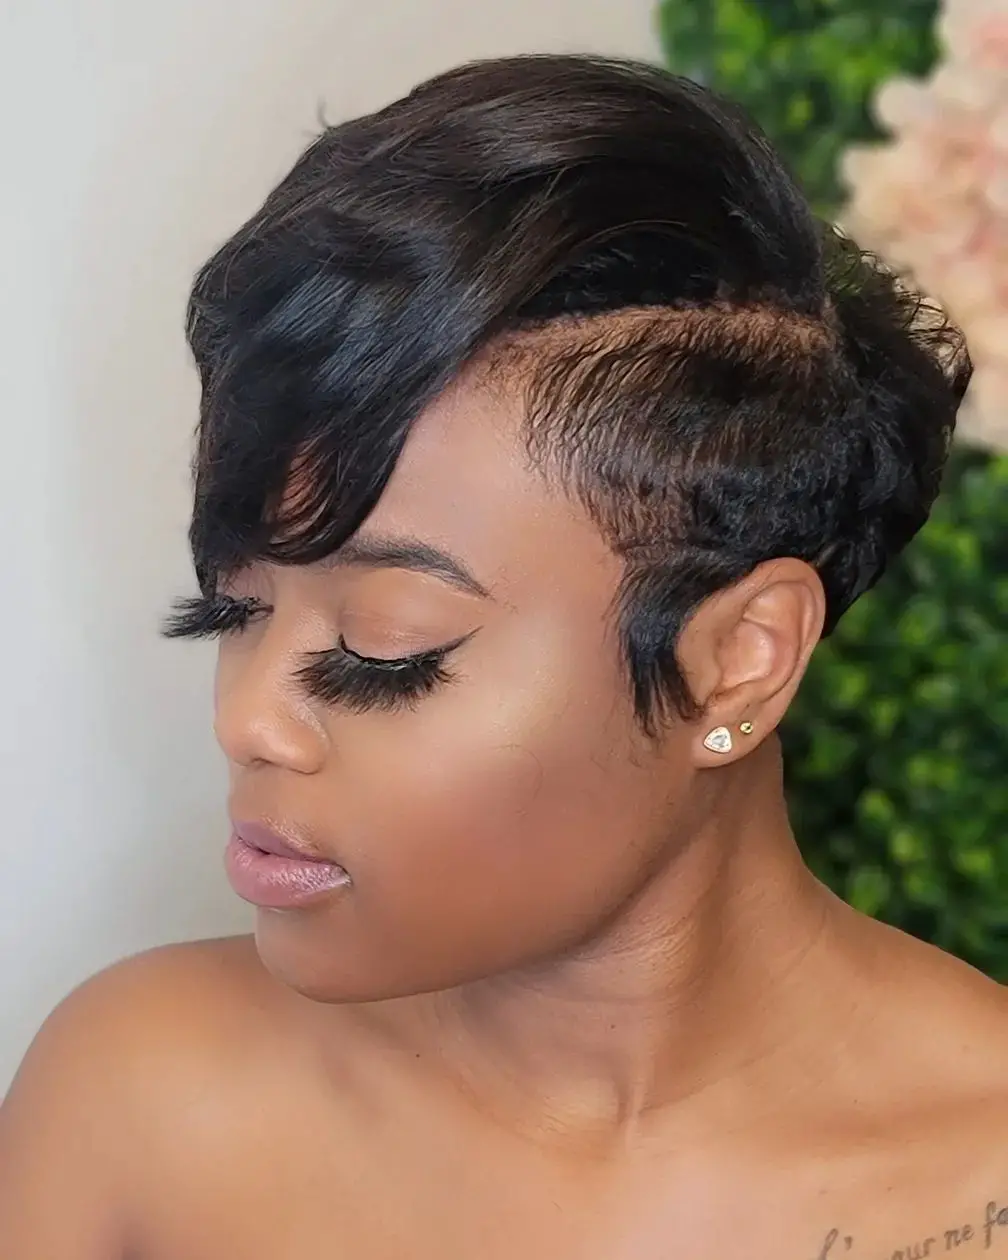 71-best-short-relaxed-hairstyles-for-black-women Short Tapered Pixie with Long Bangs